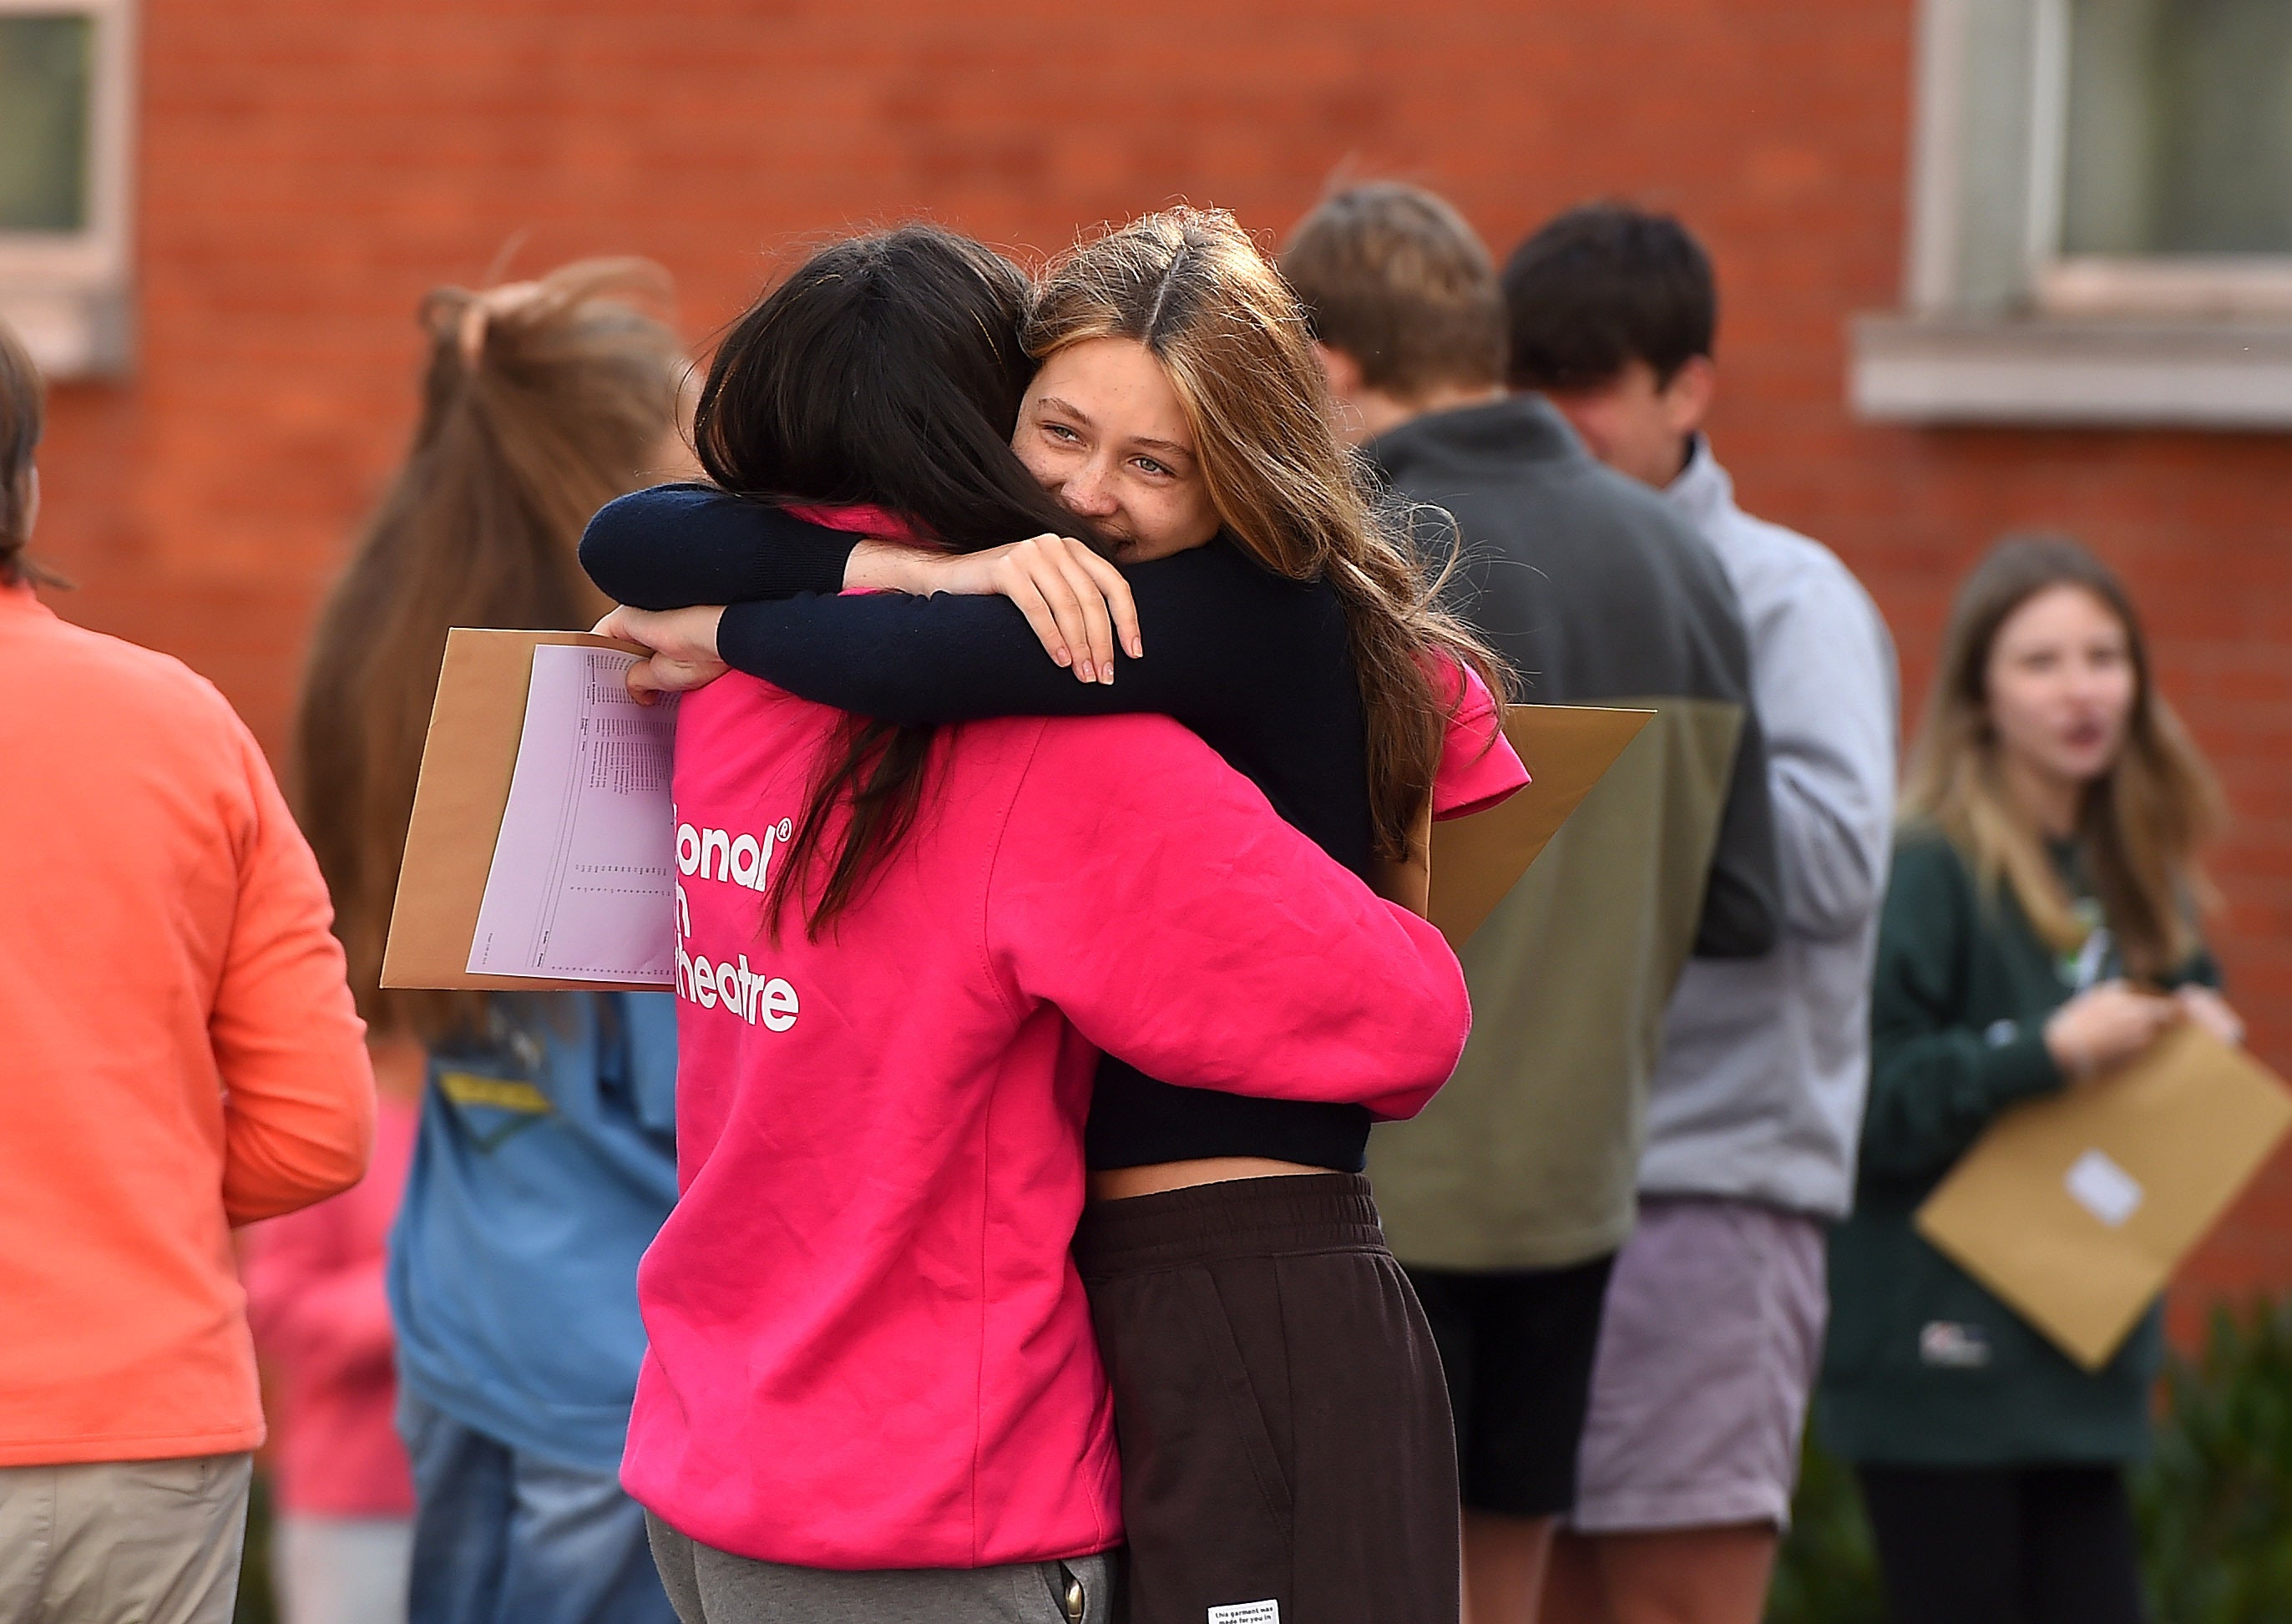 Students at Sullivan Upper School in Holywood, Co Down, celebrate after getting their GCSE results